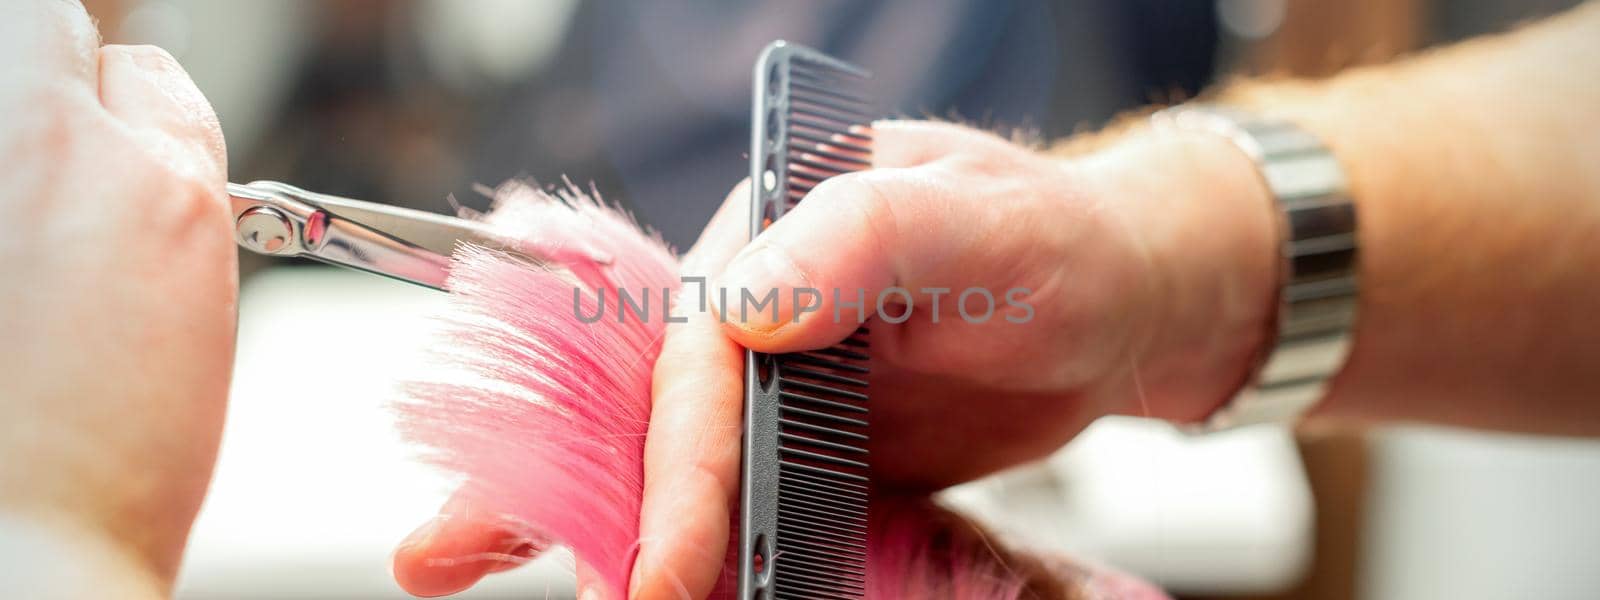 Woman having a new haircut. Male hairstylist cutting pink hair with scissors in a hair salon, close up. by okskukuruza